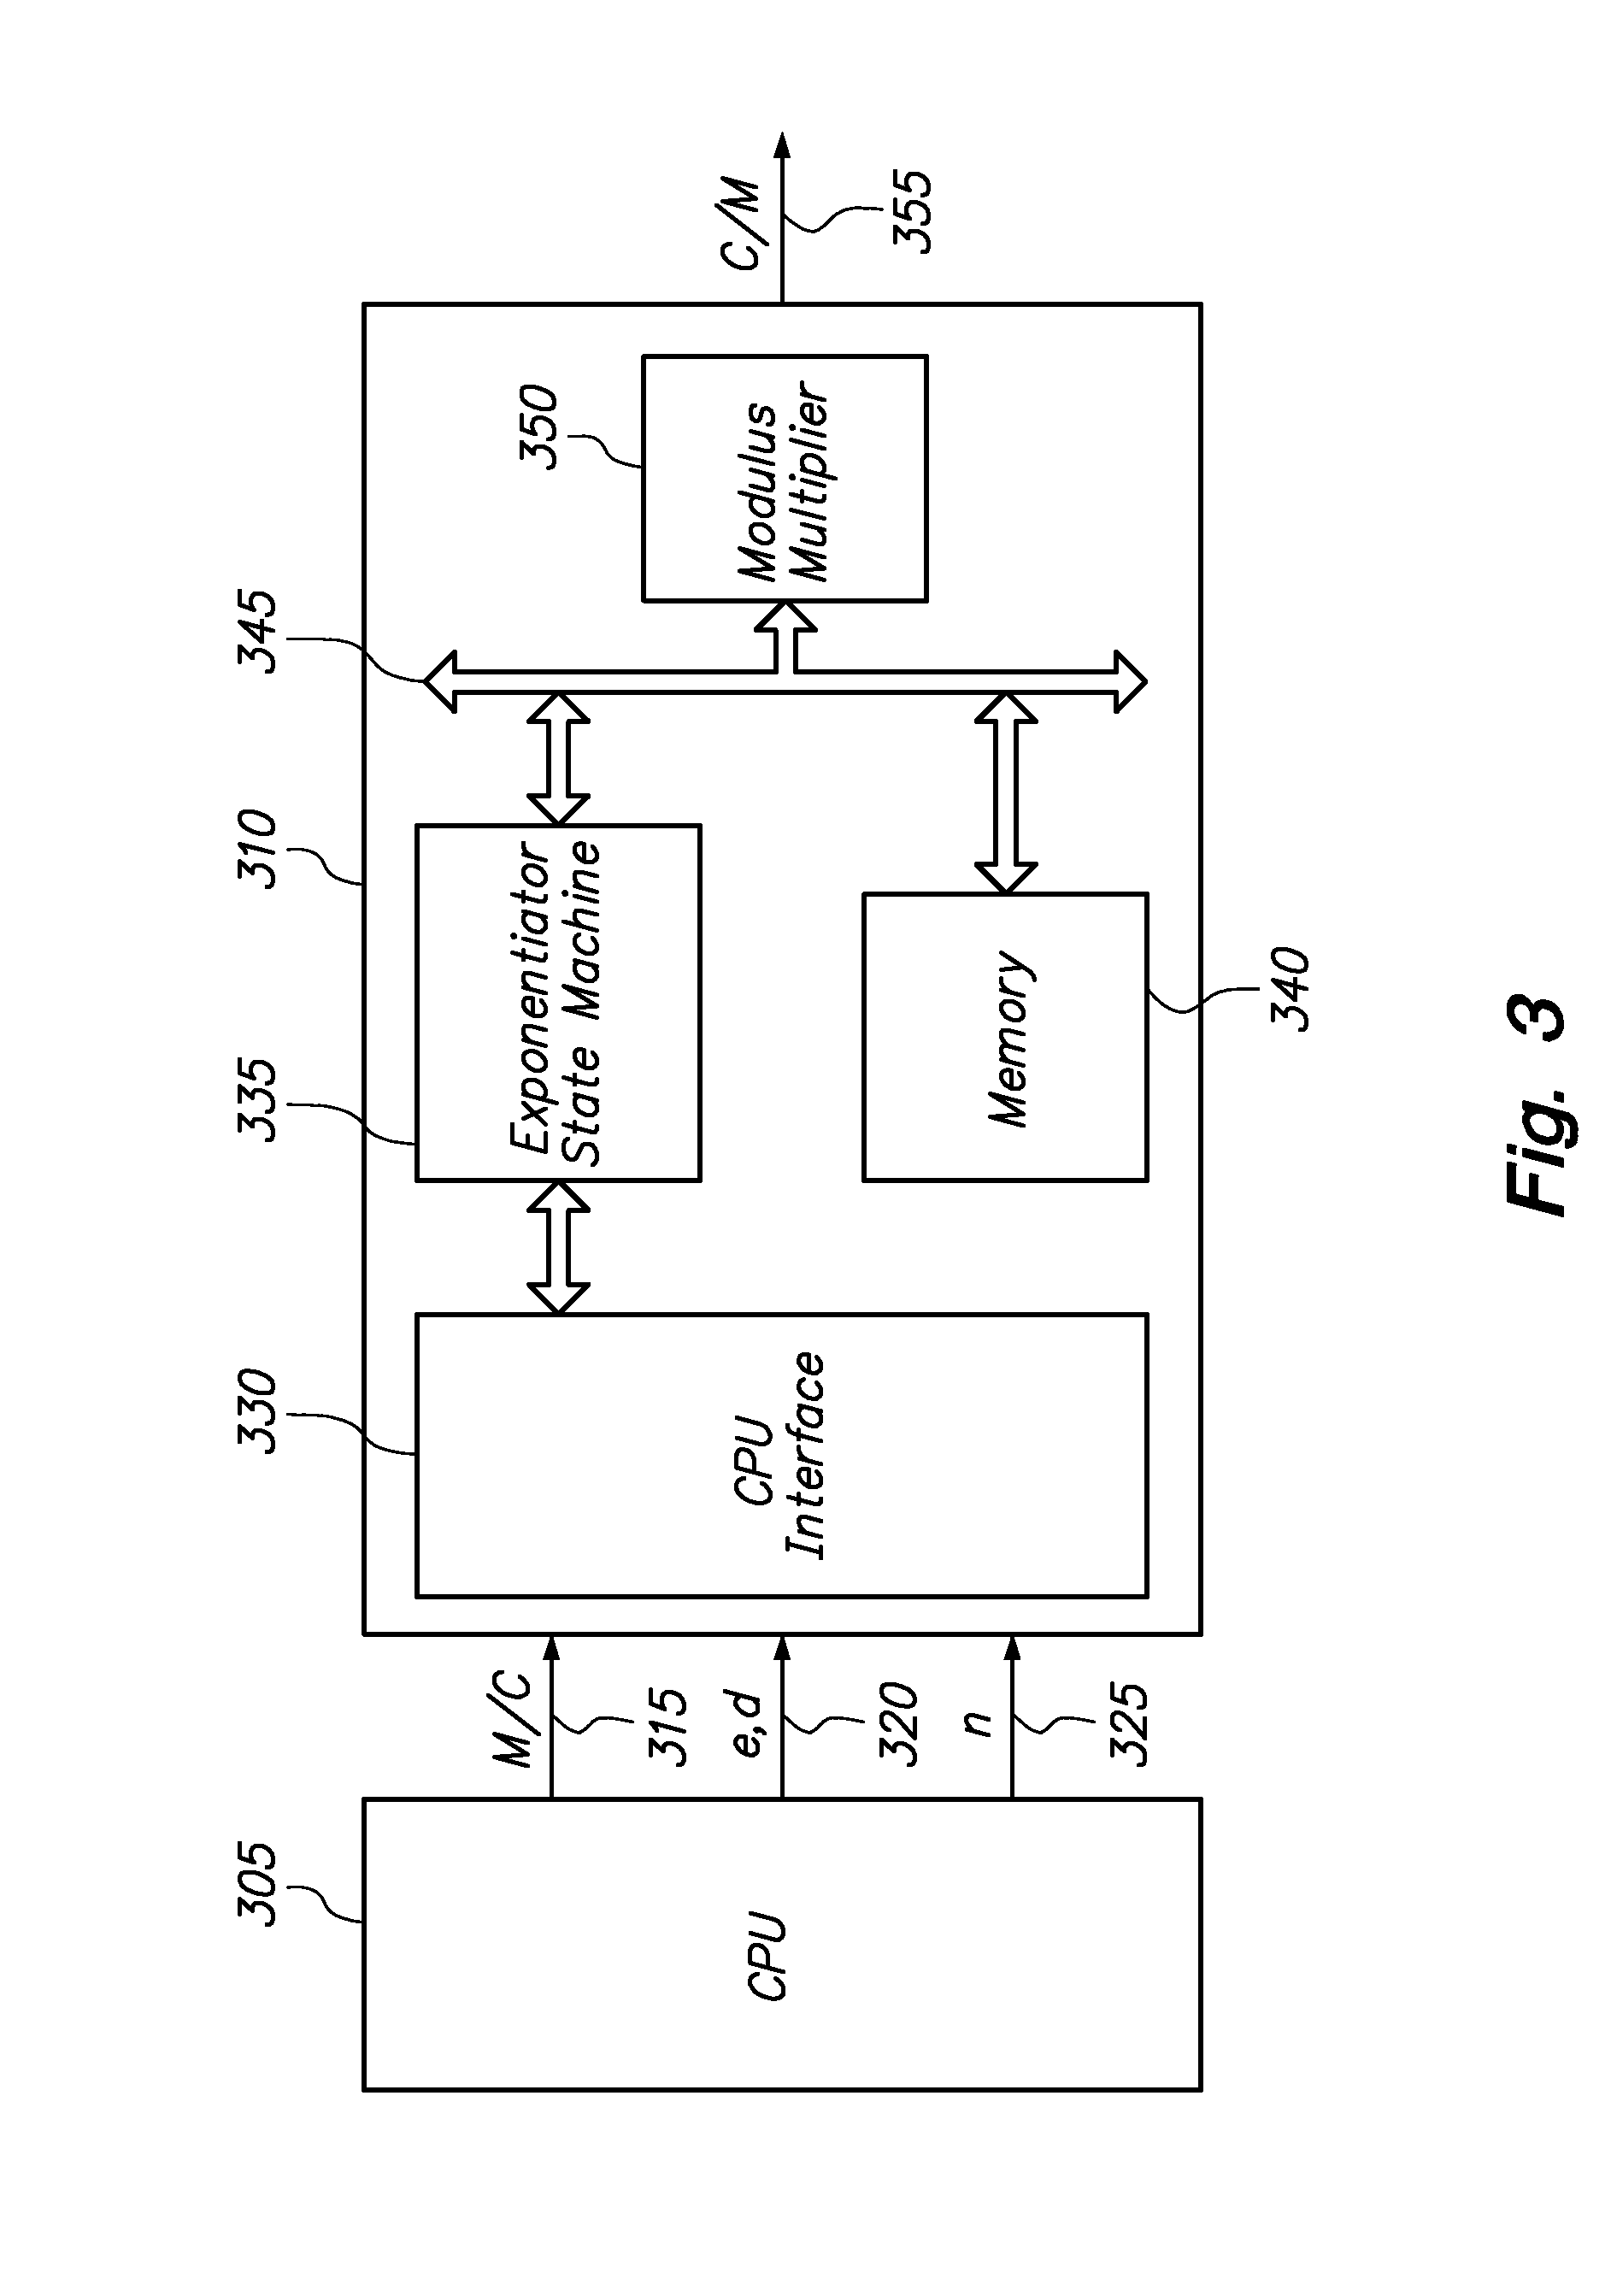 System and Method for Modular Exponentiation